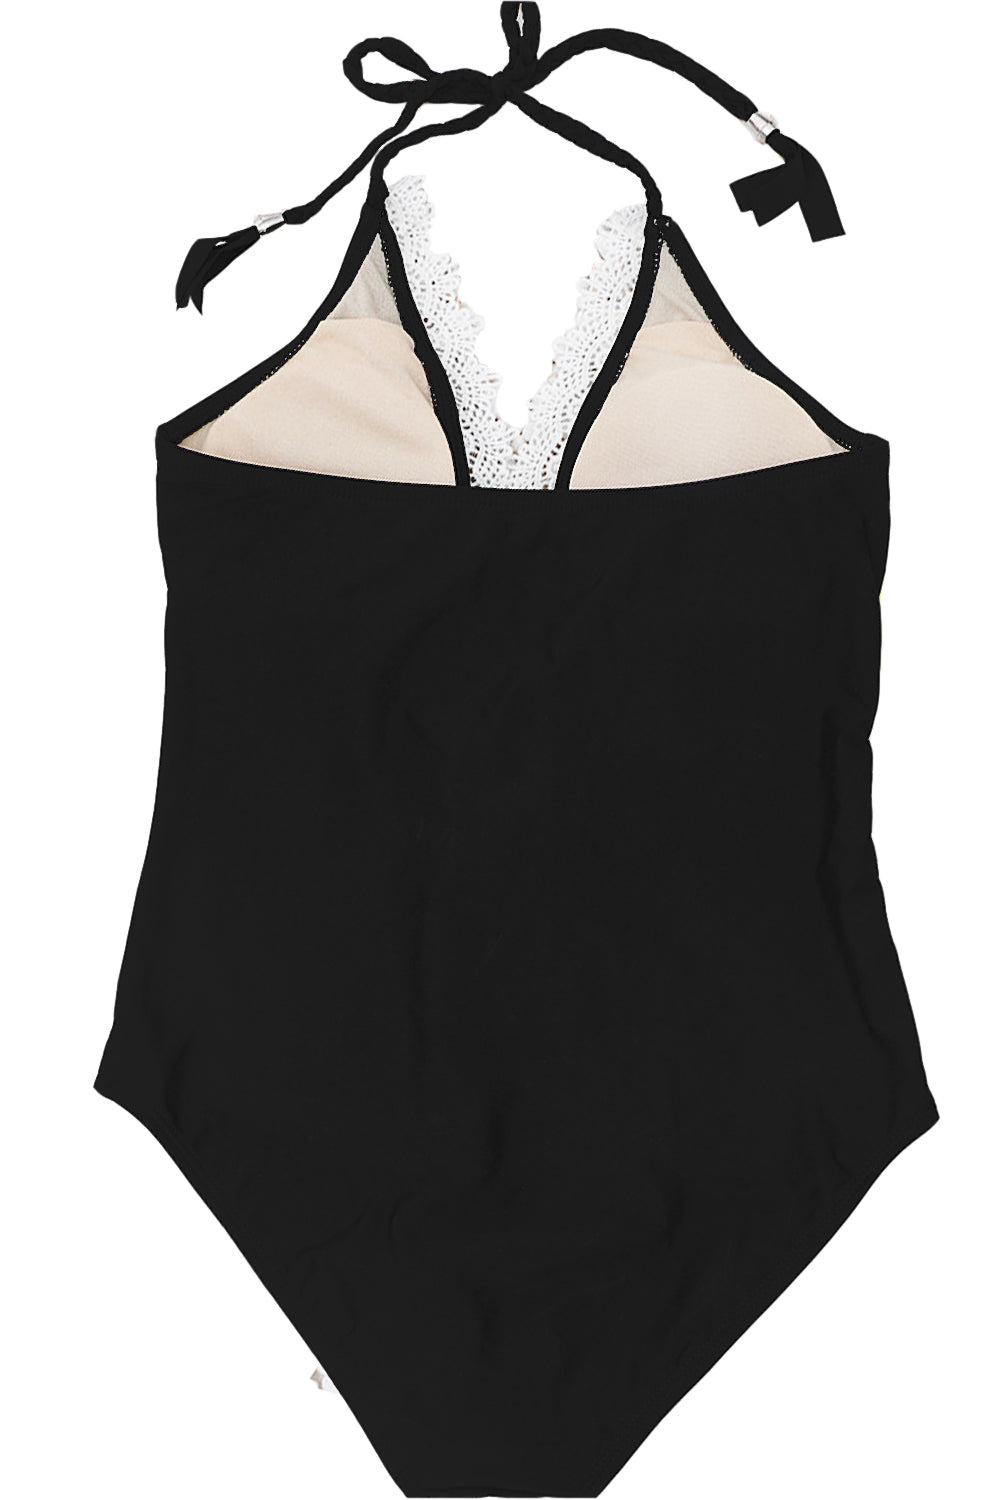 Iyasson Ladies Vintage Lace One-piece Swimsuit